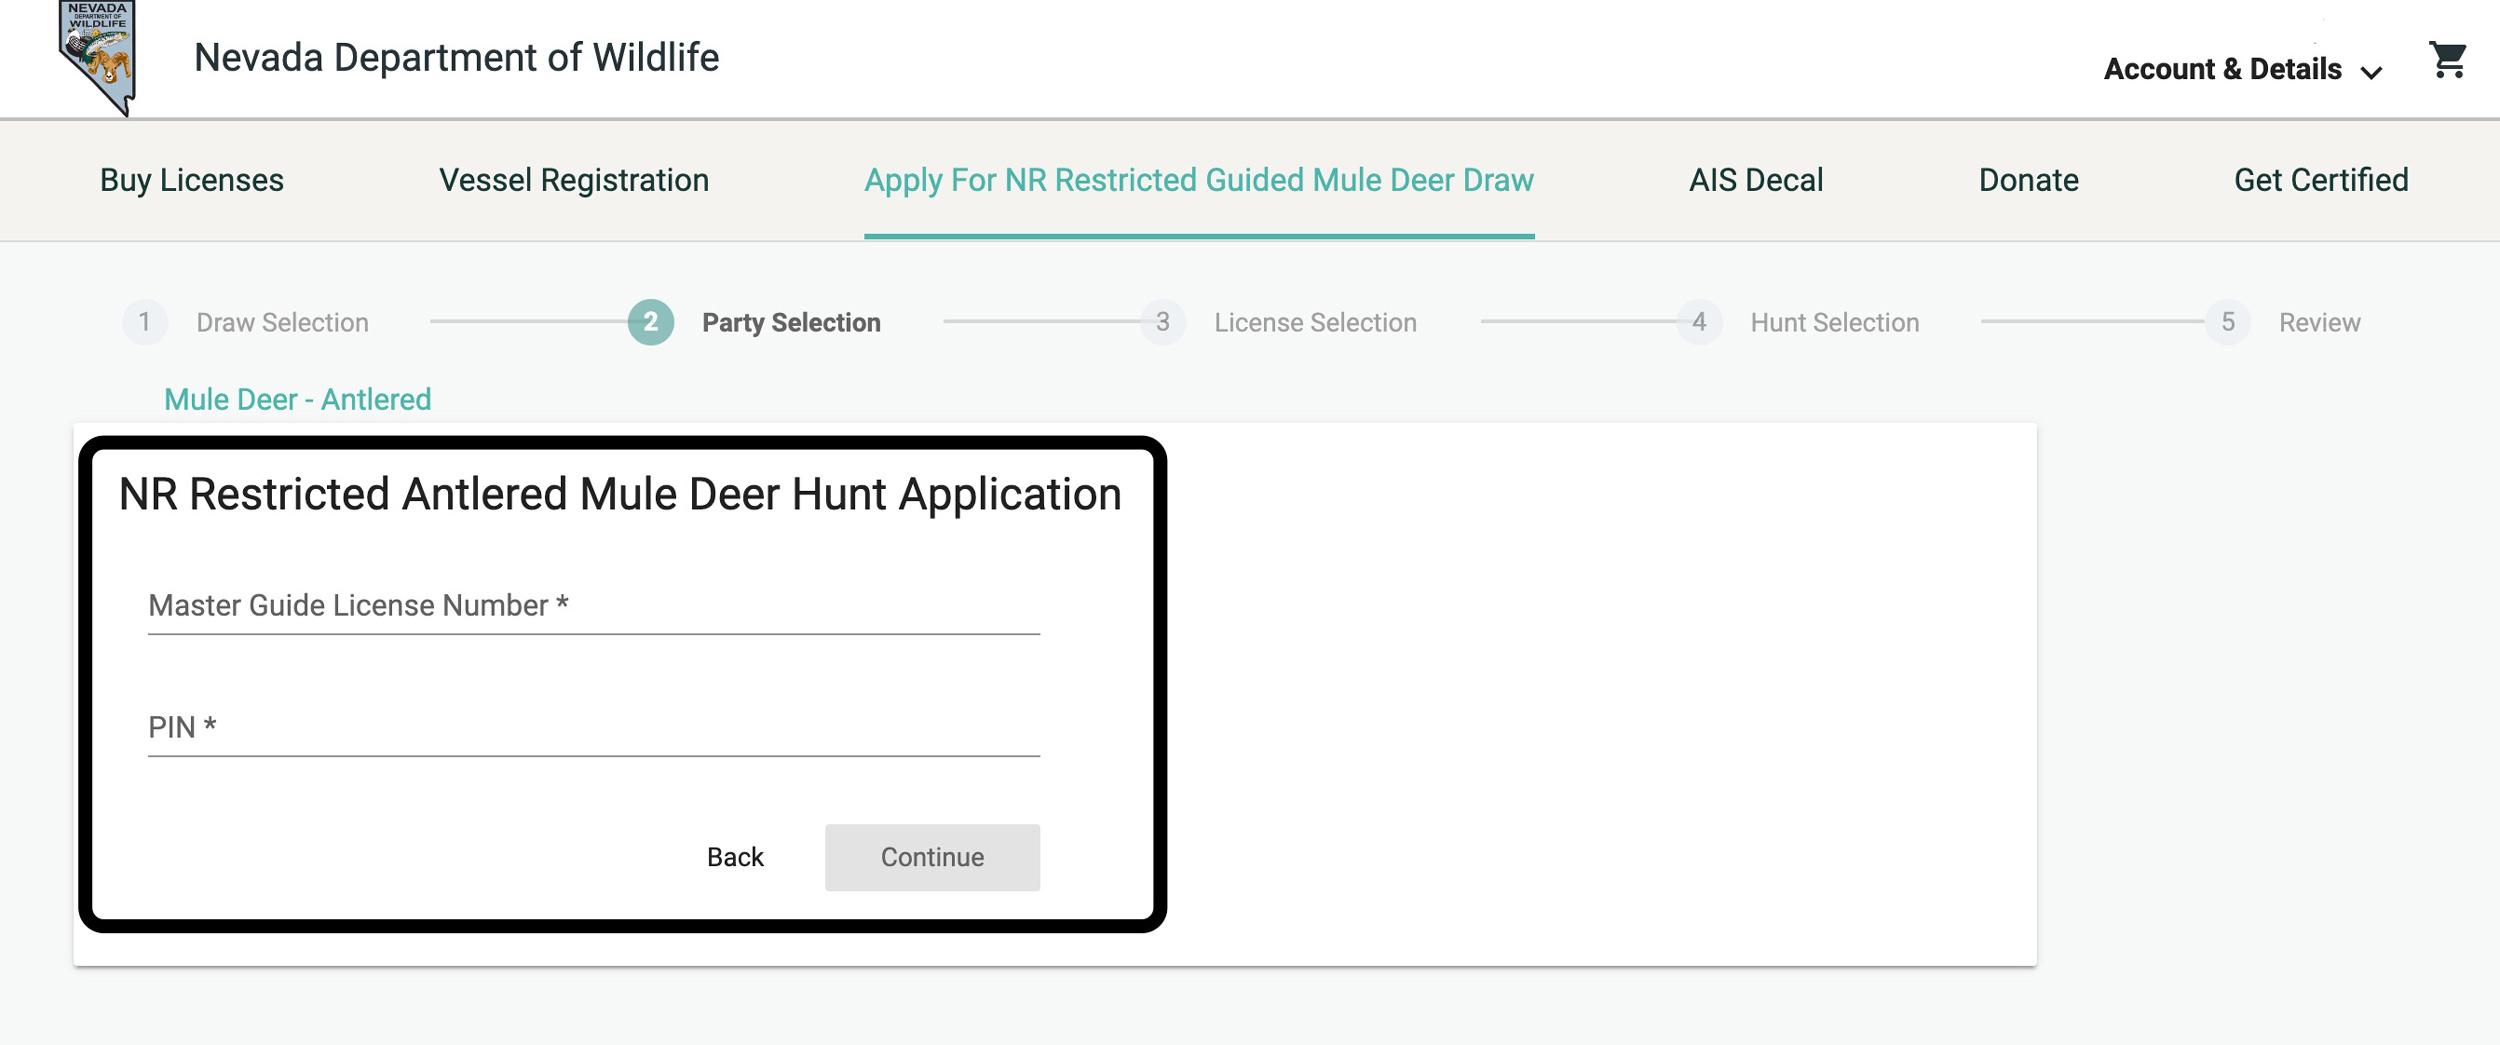 Adding Master Guide License number for Nevada guide draw deer application